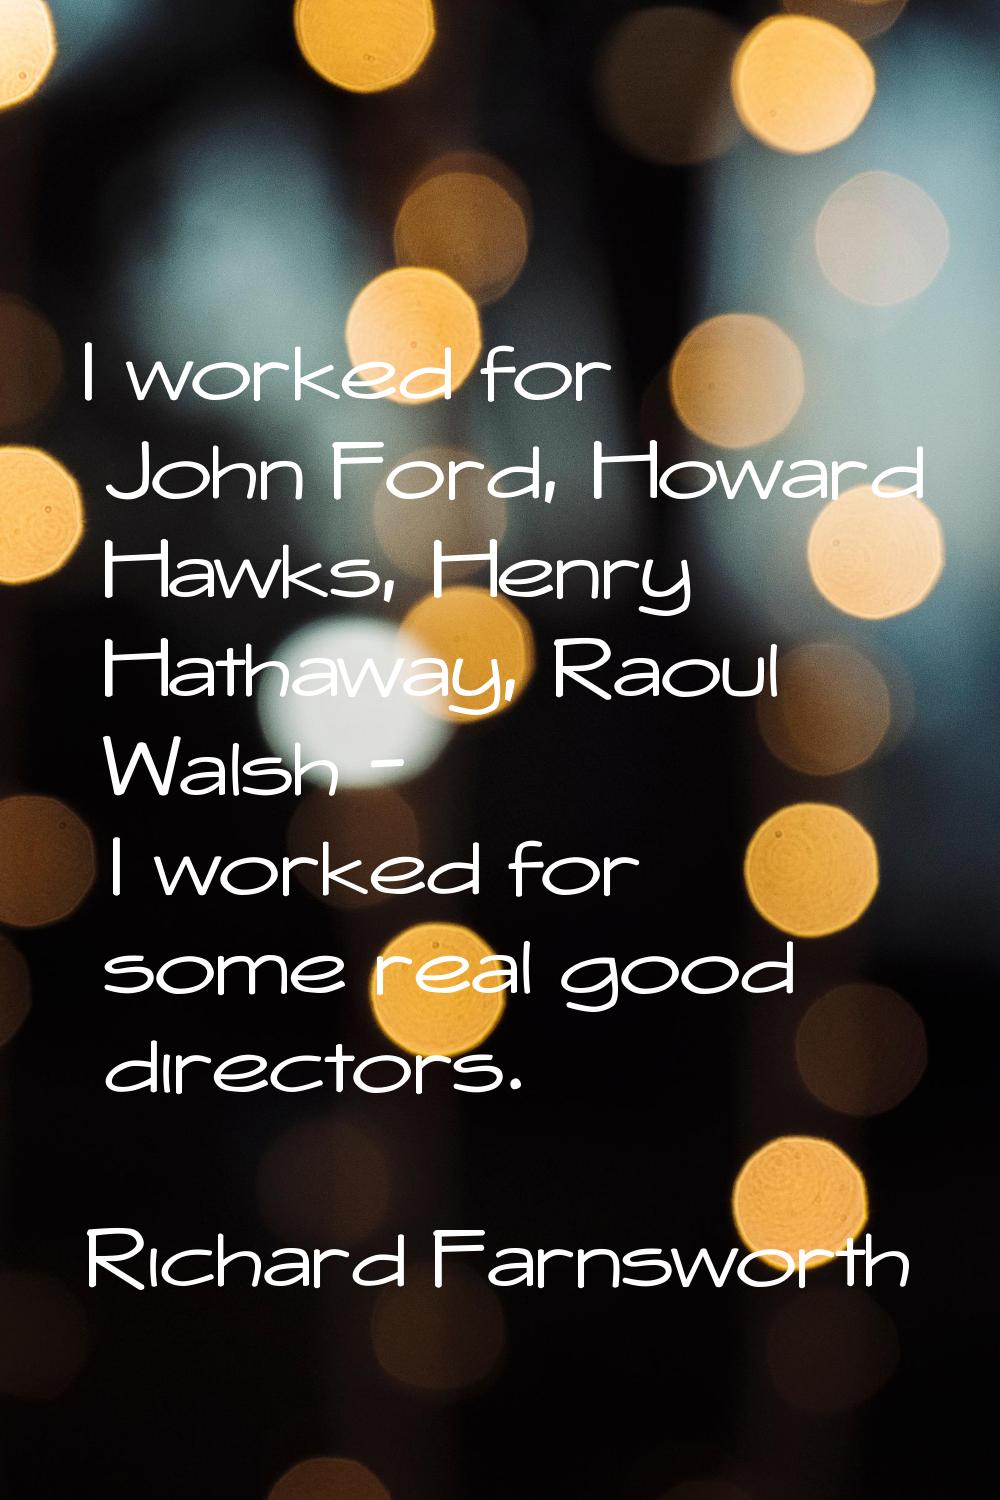 I worked for John Ford, Howard Hawks, Henry Hathaway, Raoul Walsh - I worked for some real good dir